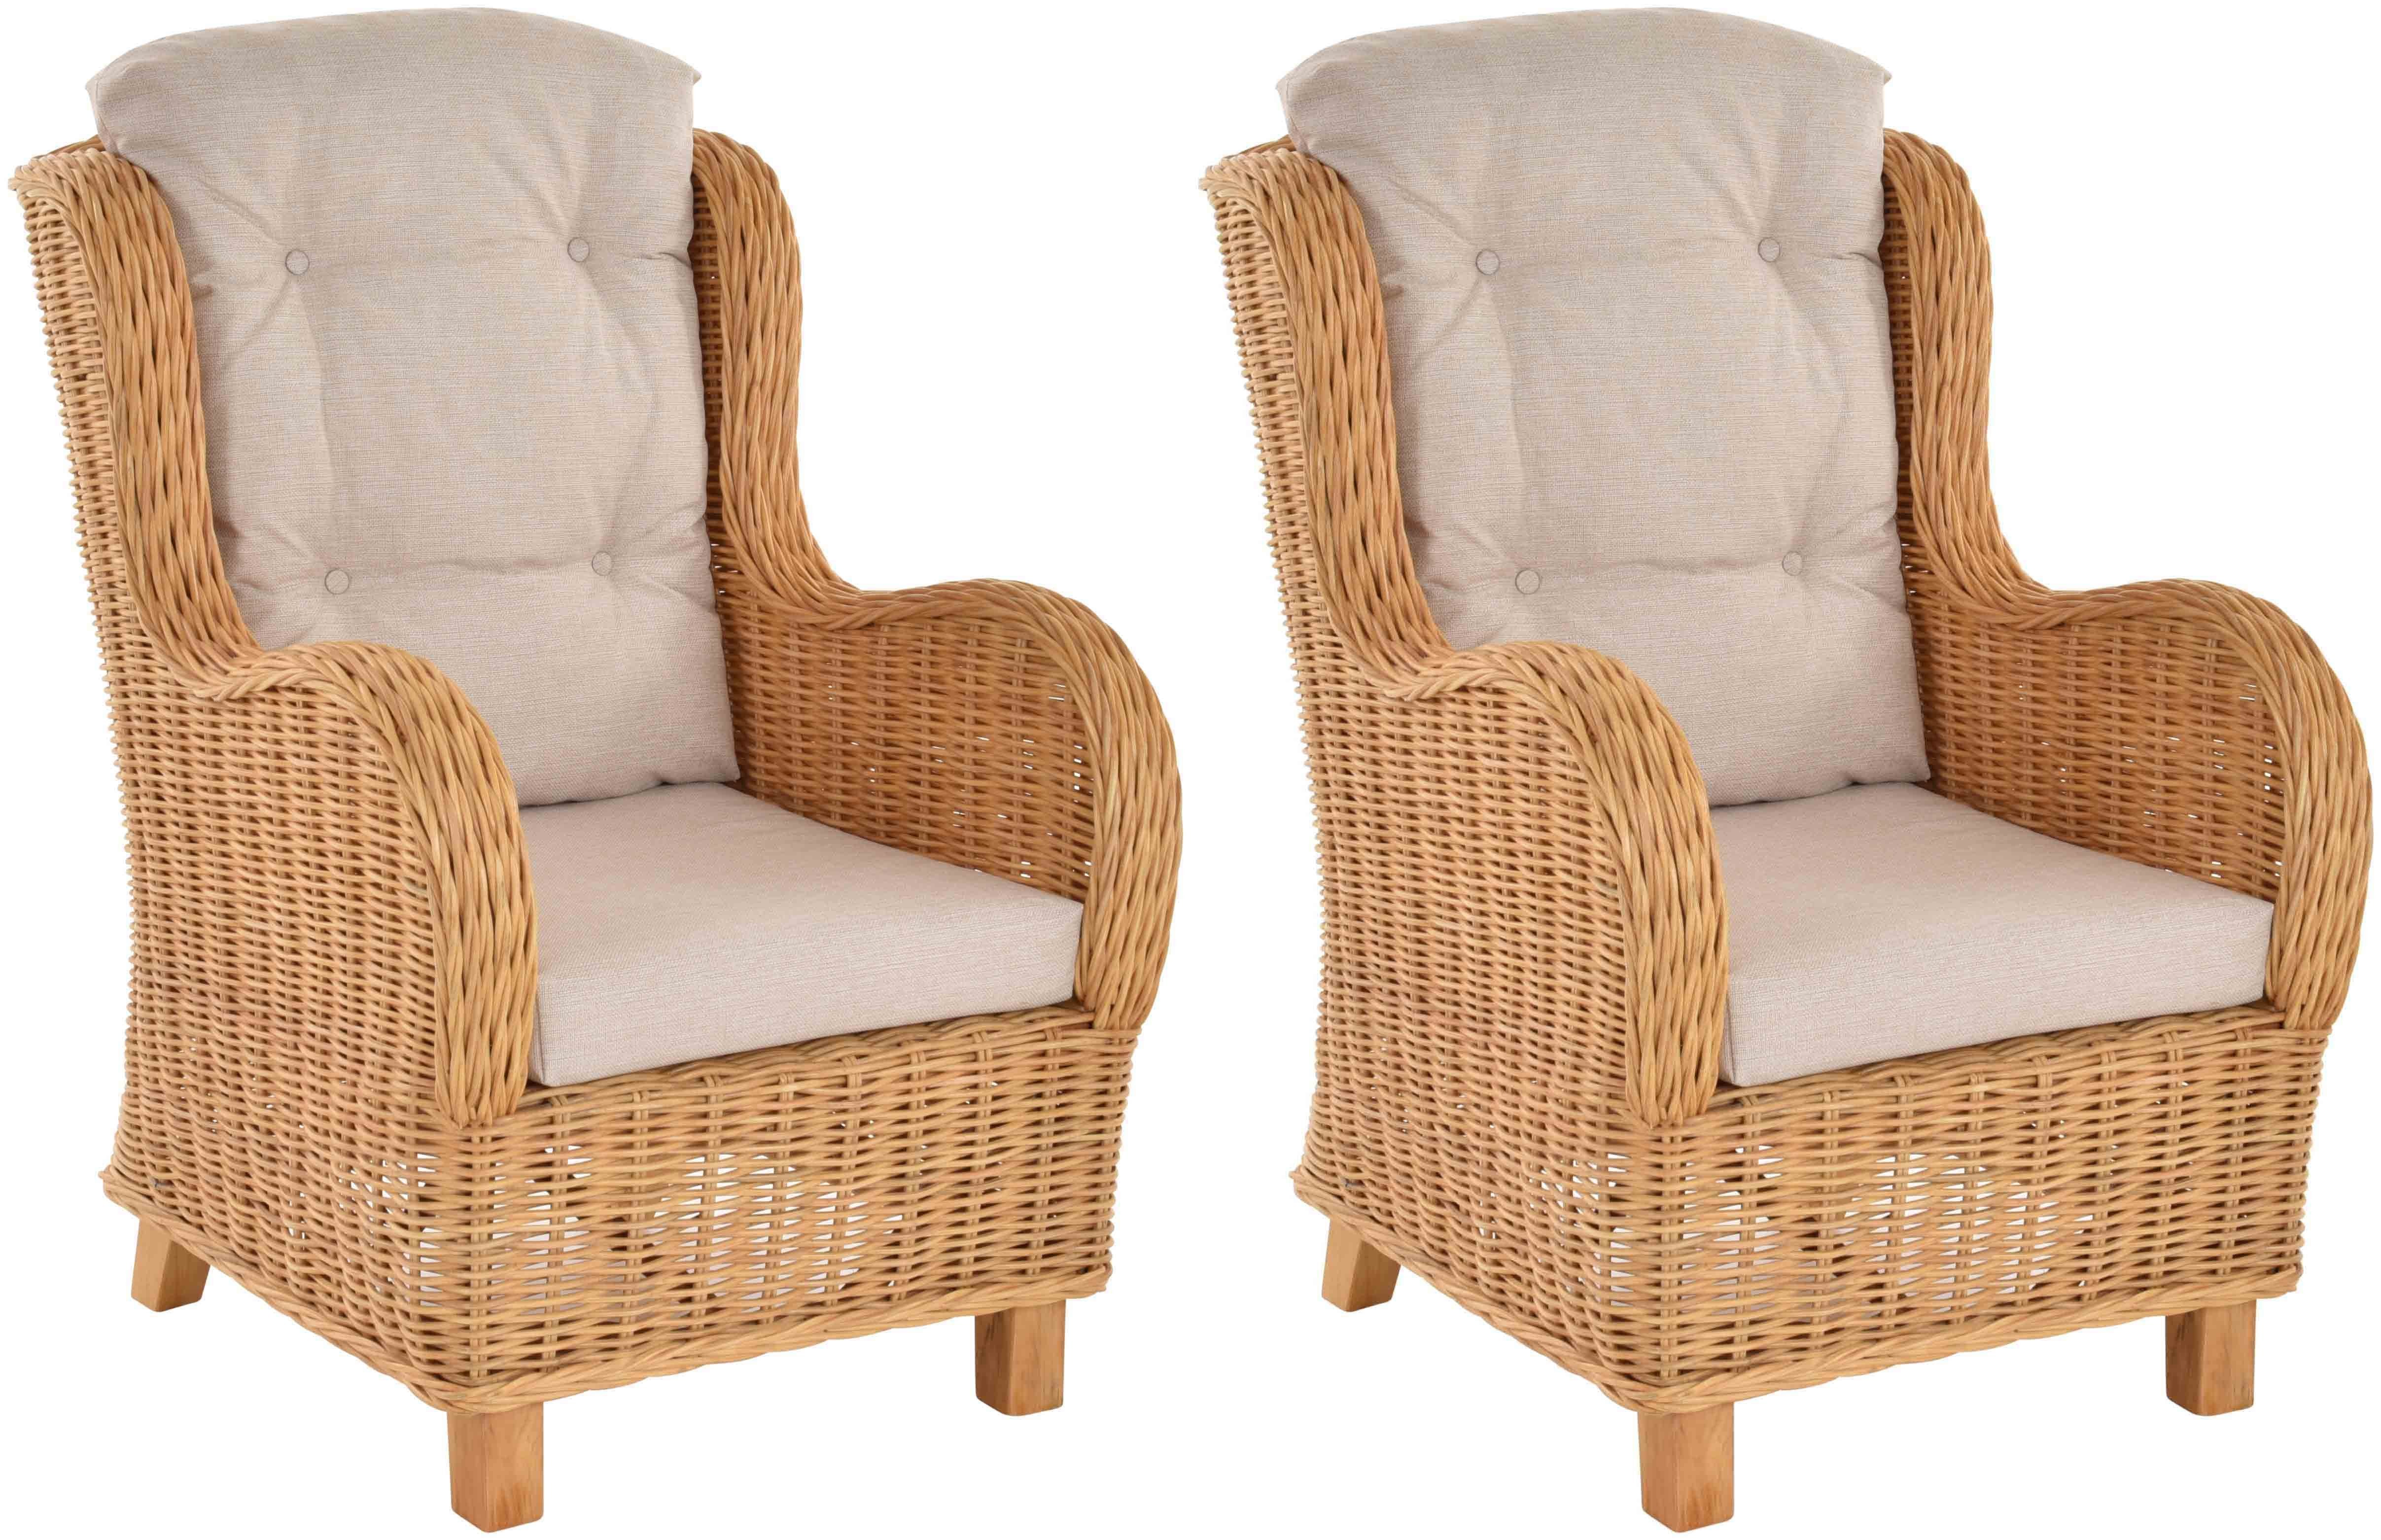 Krines Home Loungesessel Set/2 Lesesessel Birmingham Rattansessel Rattanmöbel Set Sessel Rattan Honig